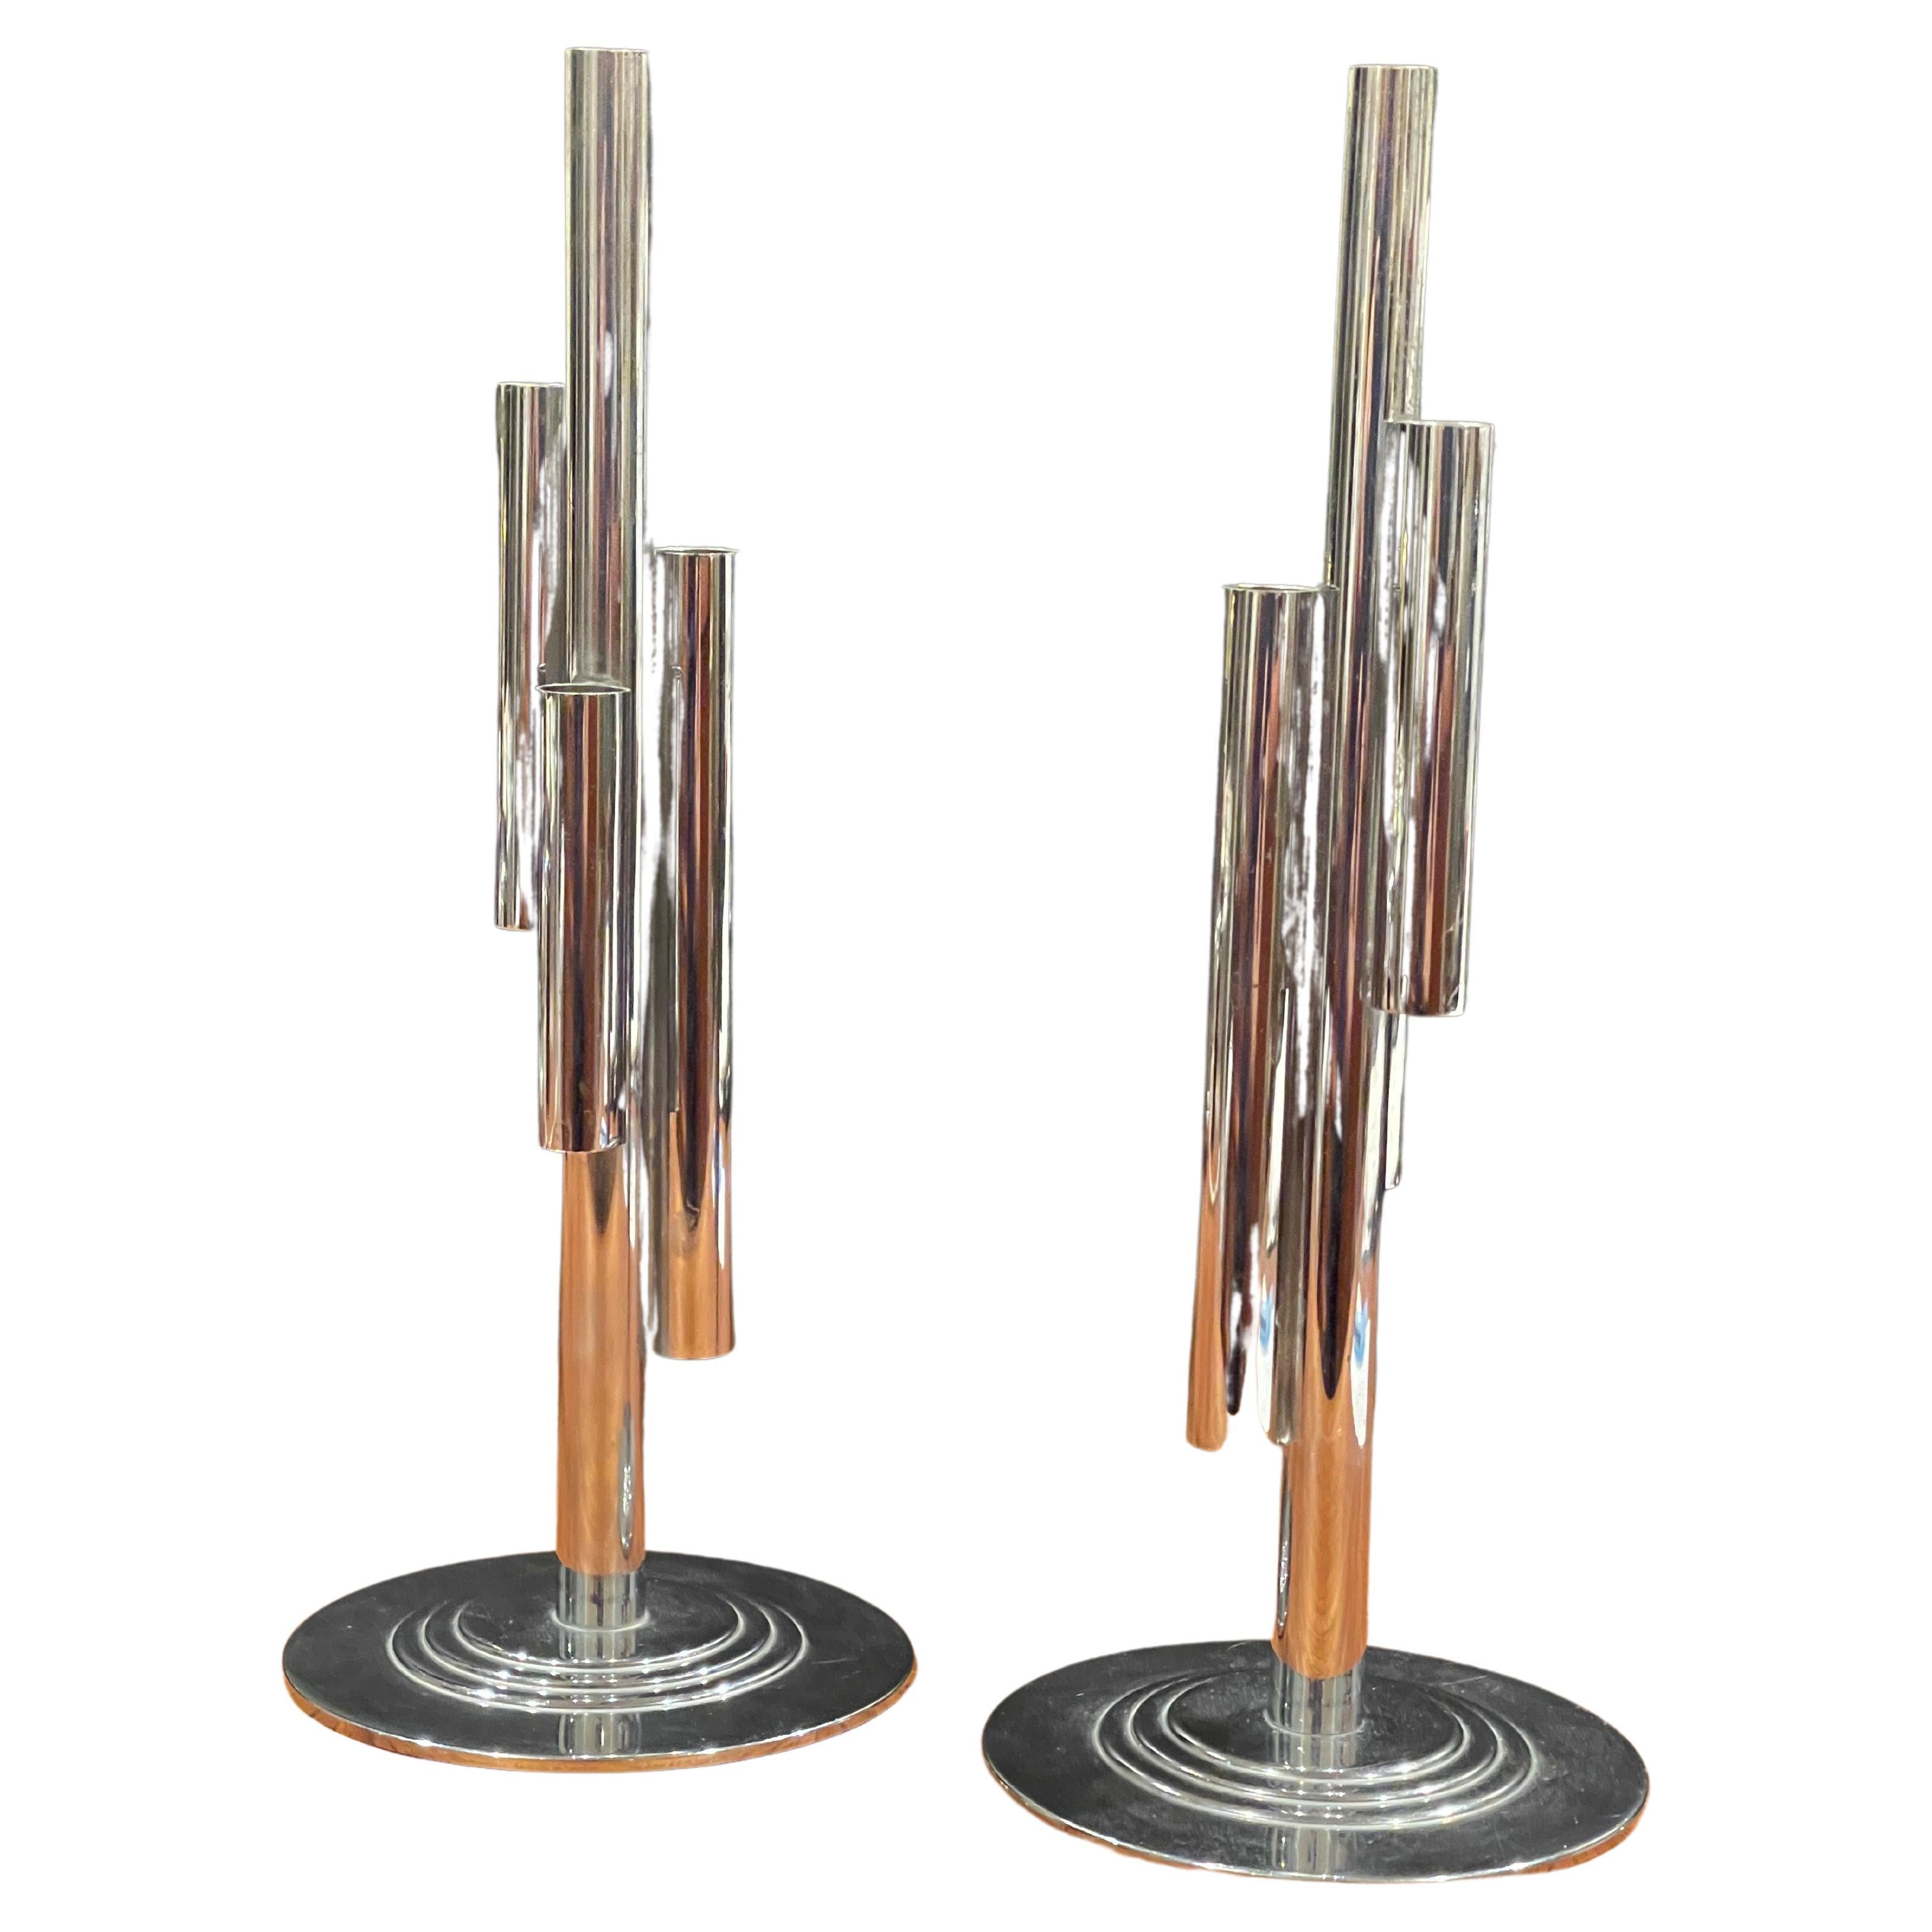 Pair of Art Deco Tubular Chrome Bud Vases by Ruth & William Gerth for Chase Co